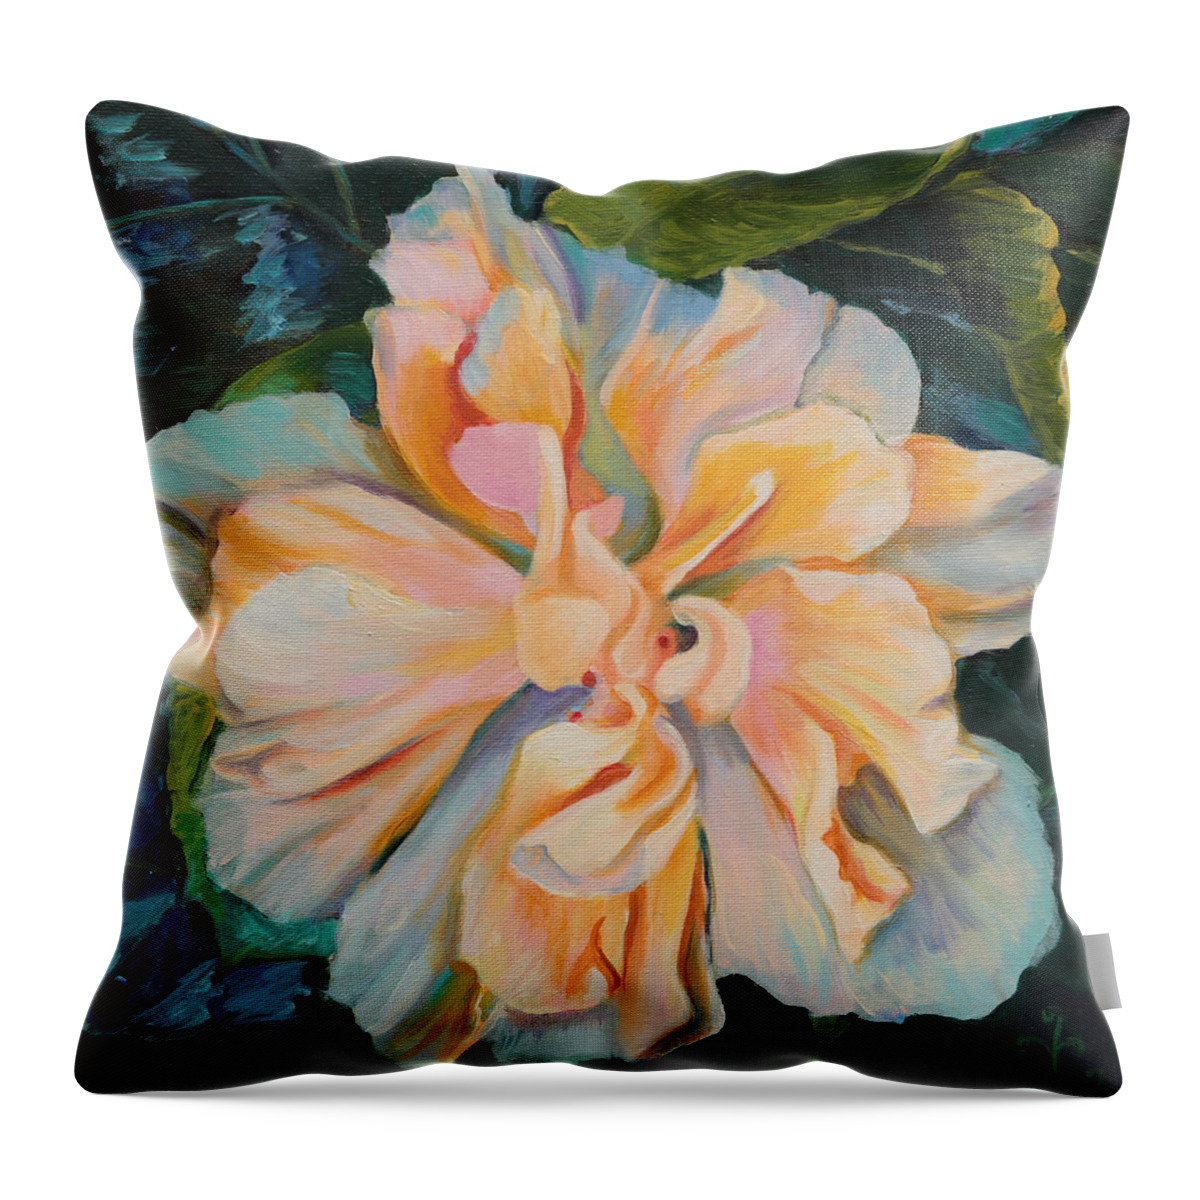 Flower Throw Pillow featuring the painting Unity by Trina Teele